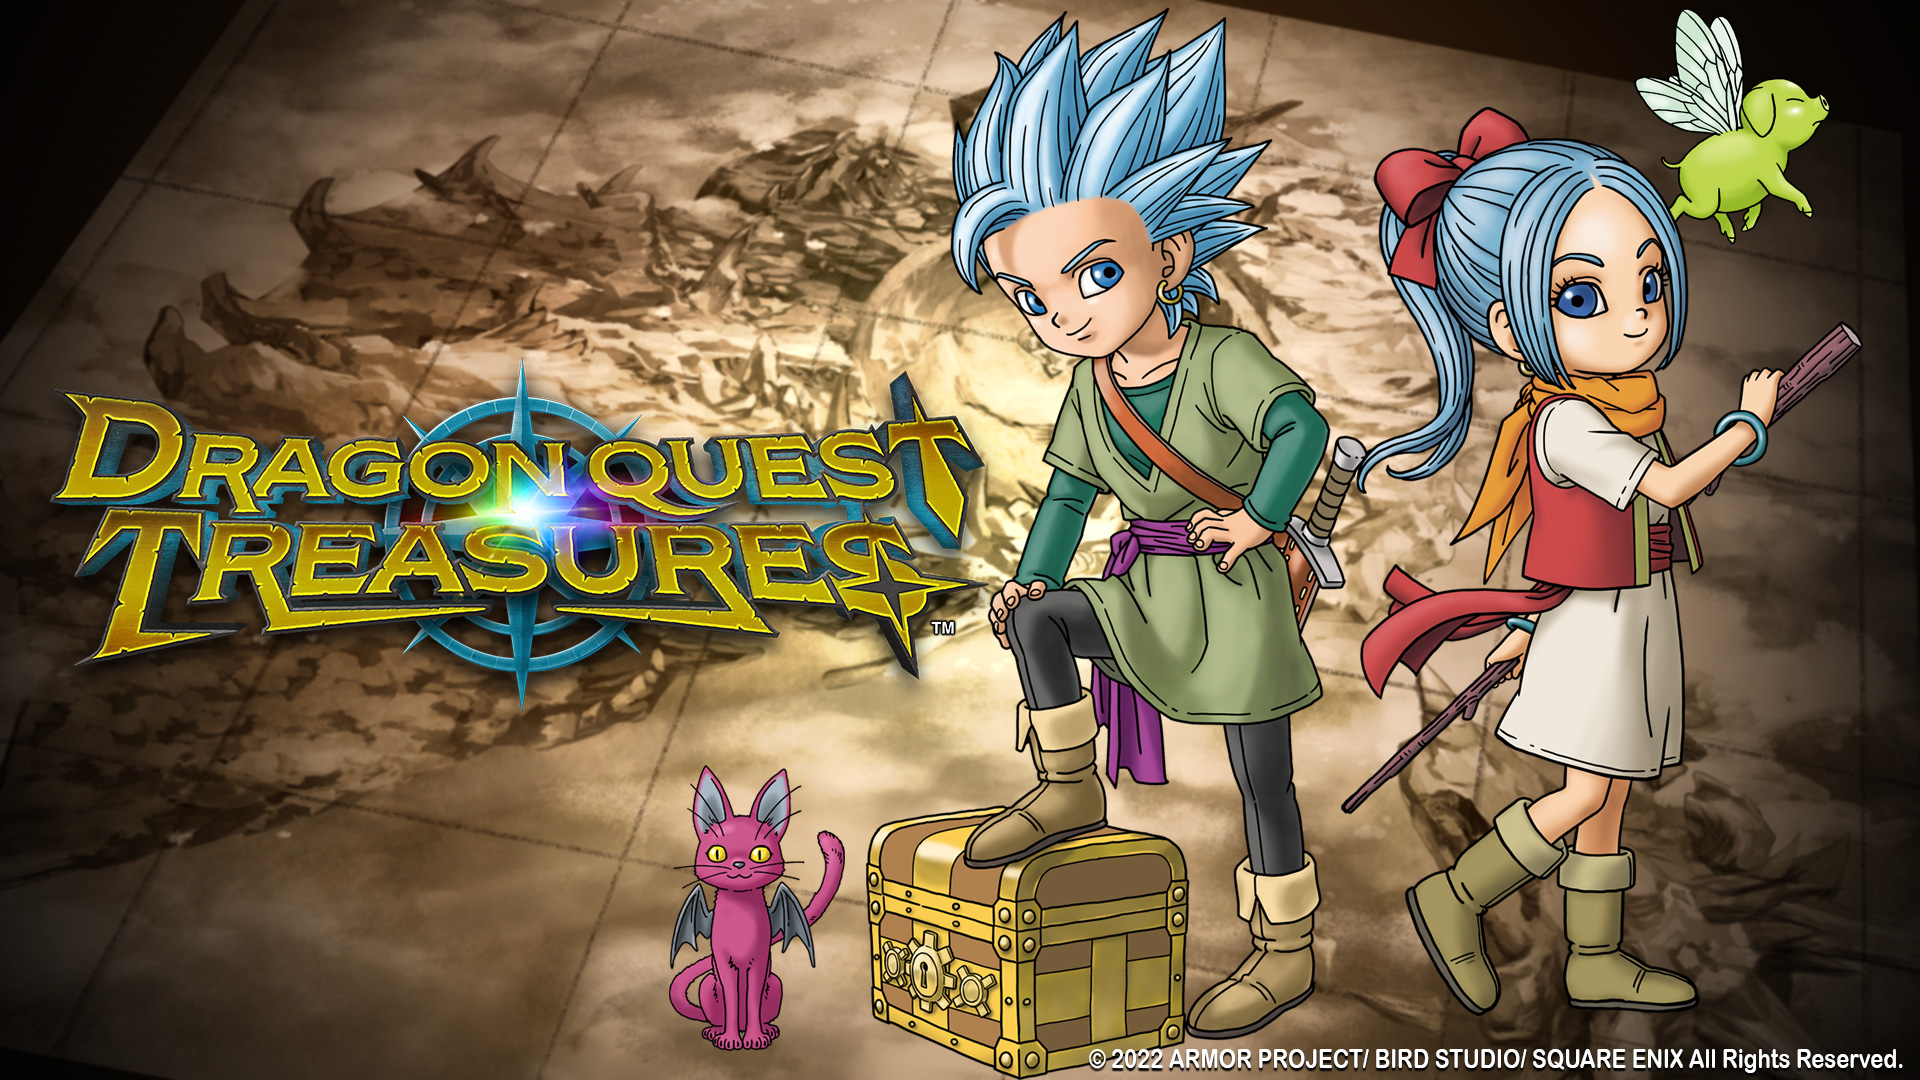 Dragon Quest Treasures, a spin-off prequel of Dragon Quest 11, is out now